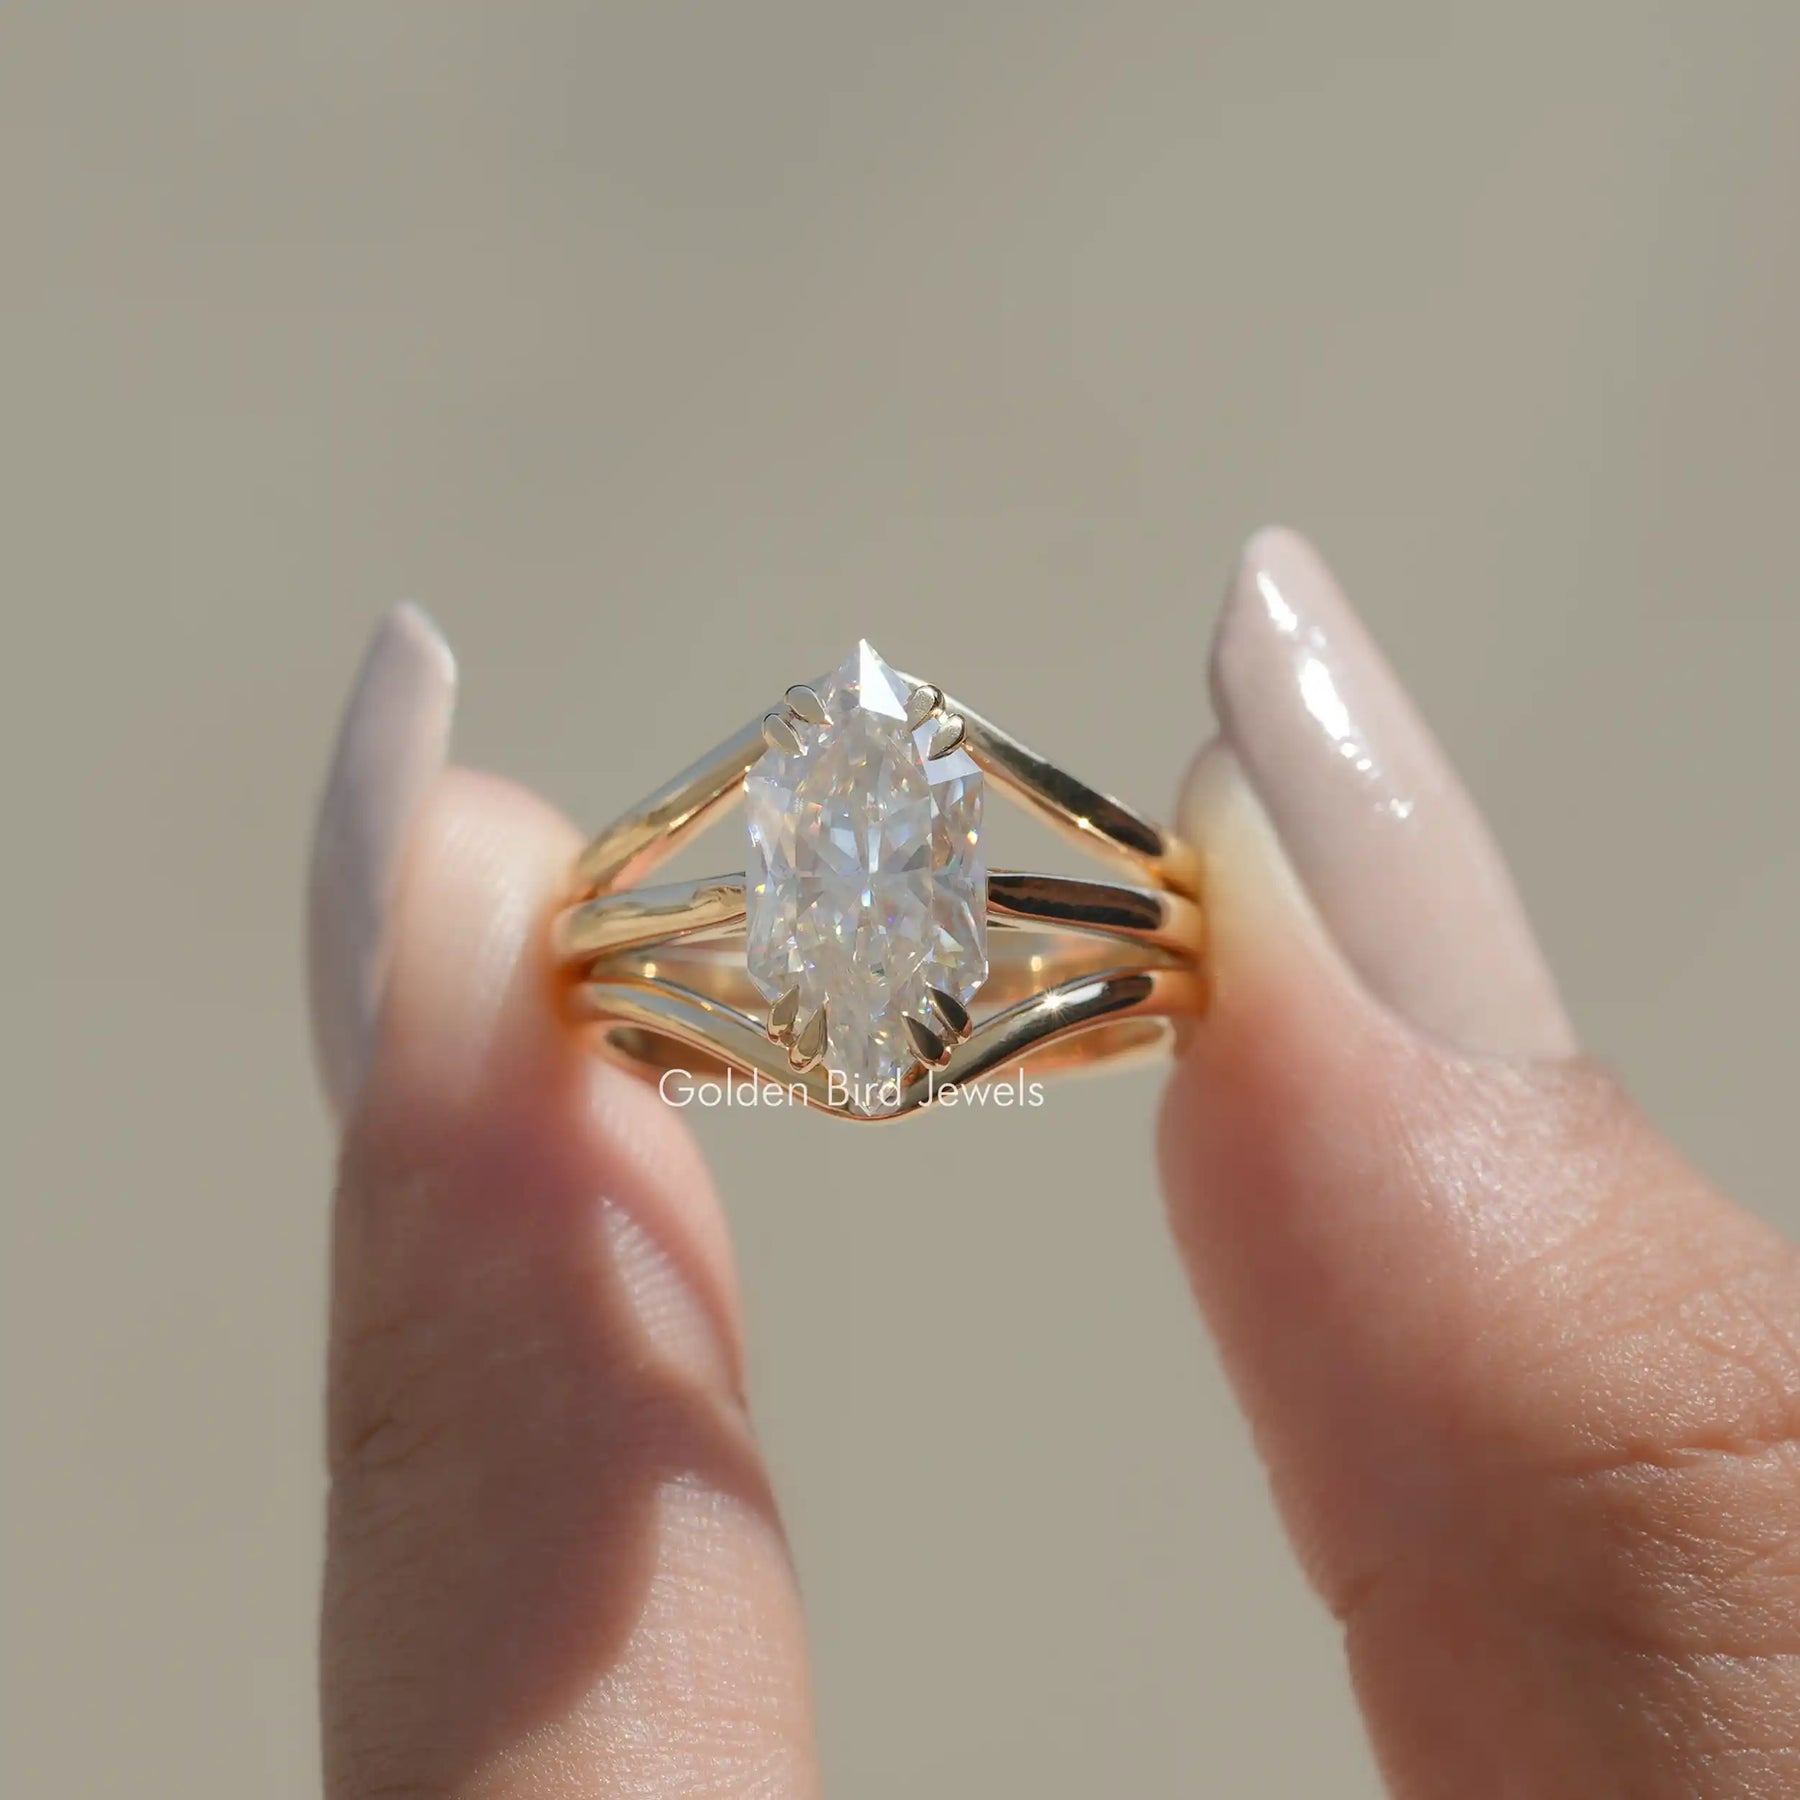 [This moissanite ring crafted with double prong setting]-[Golden Bird Jewels]